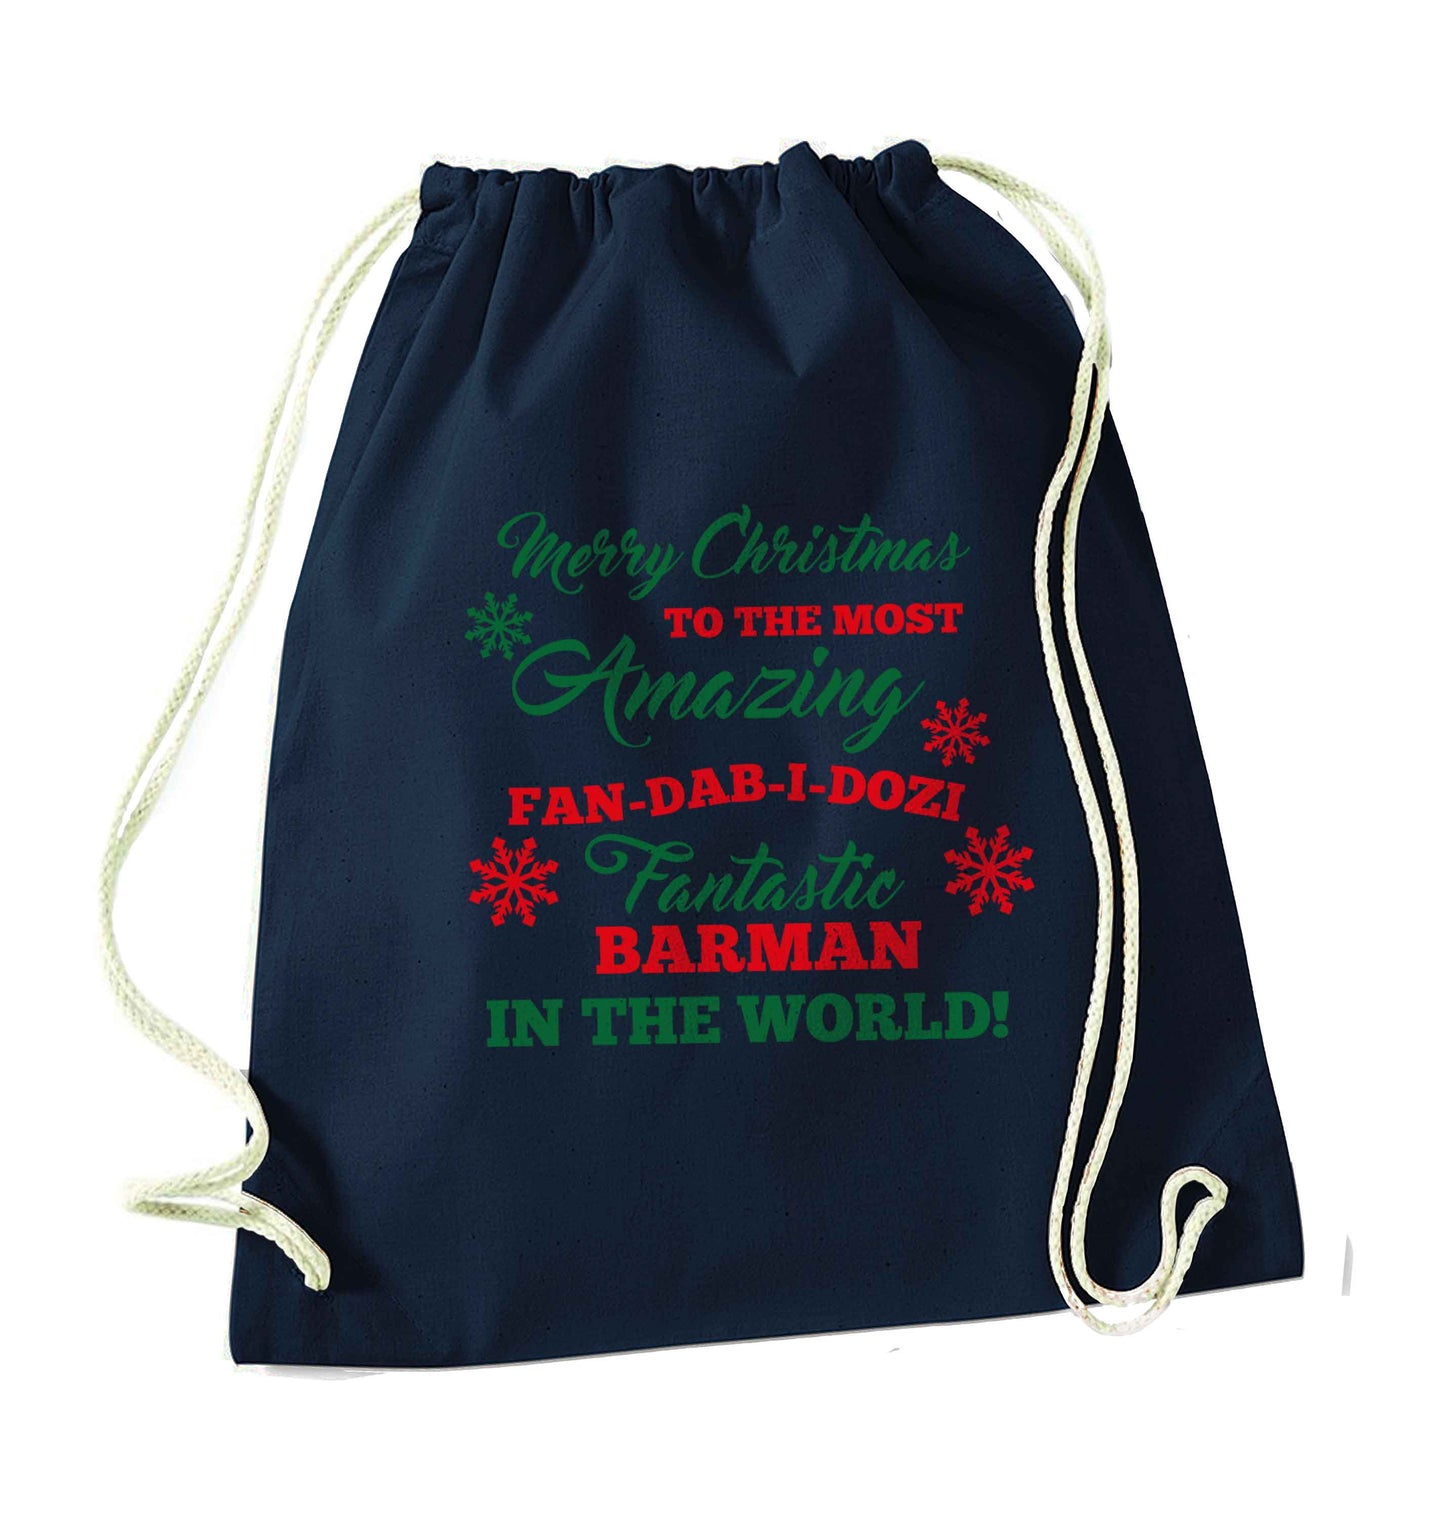 Merry Christmas to the most amazing barman in the world! navy drawstring bag